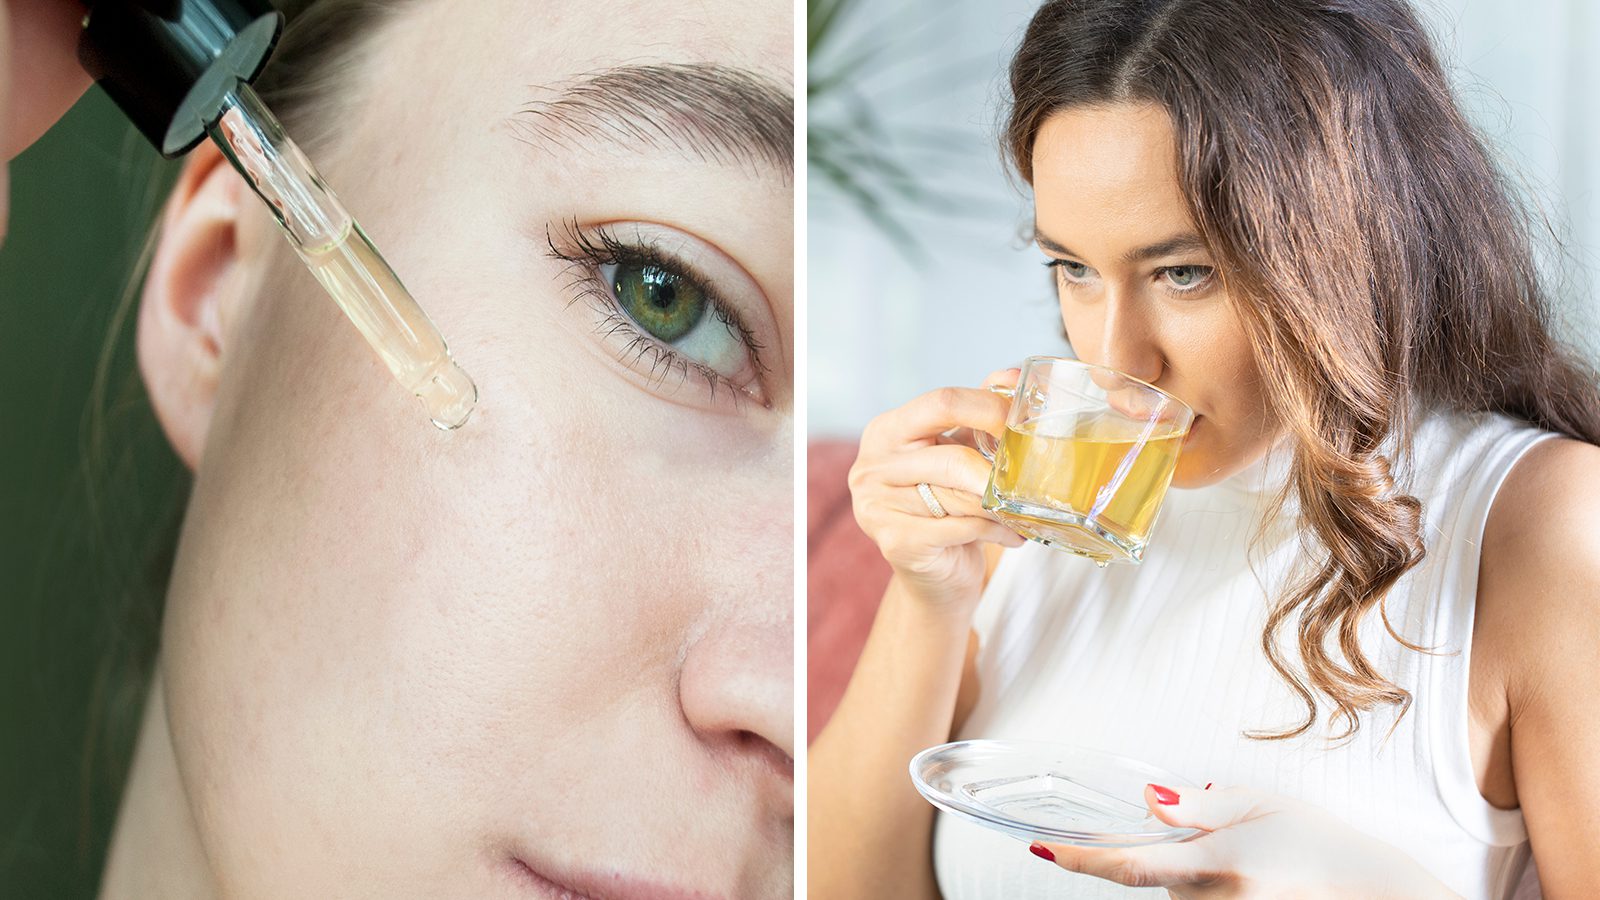 10 Acne-Safe Treatments for Glowing Skin